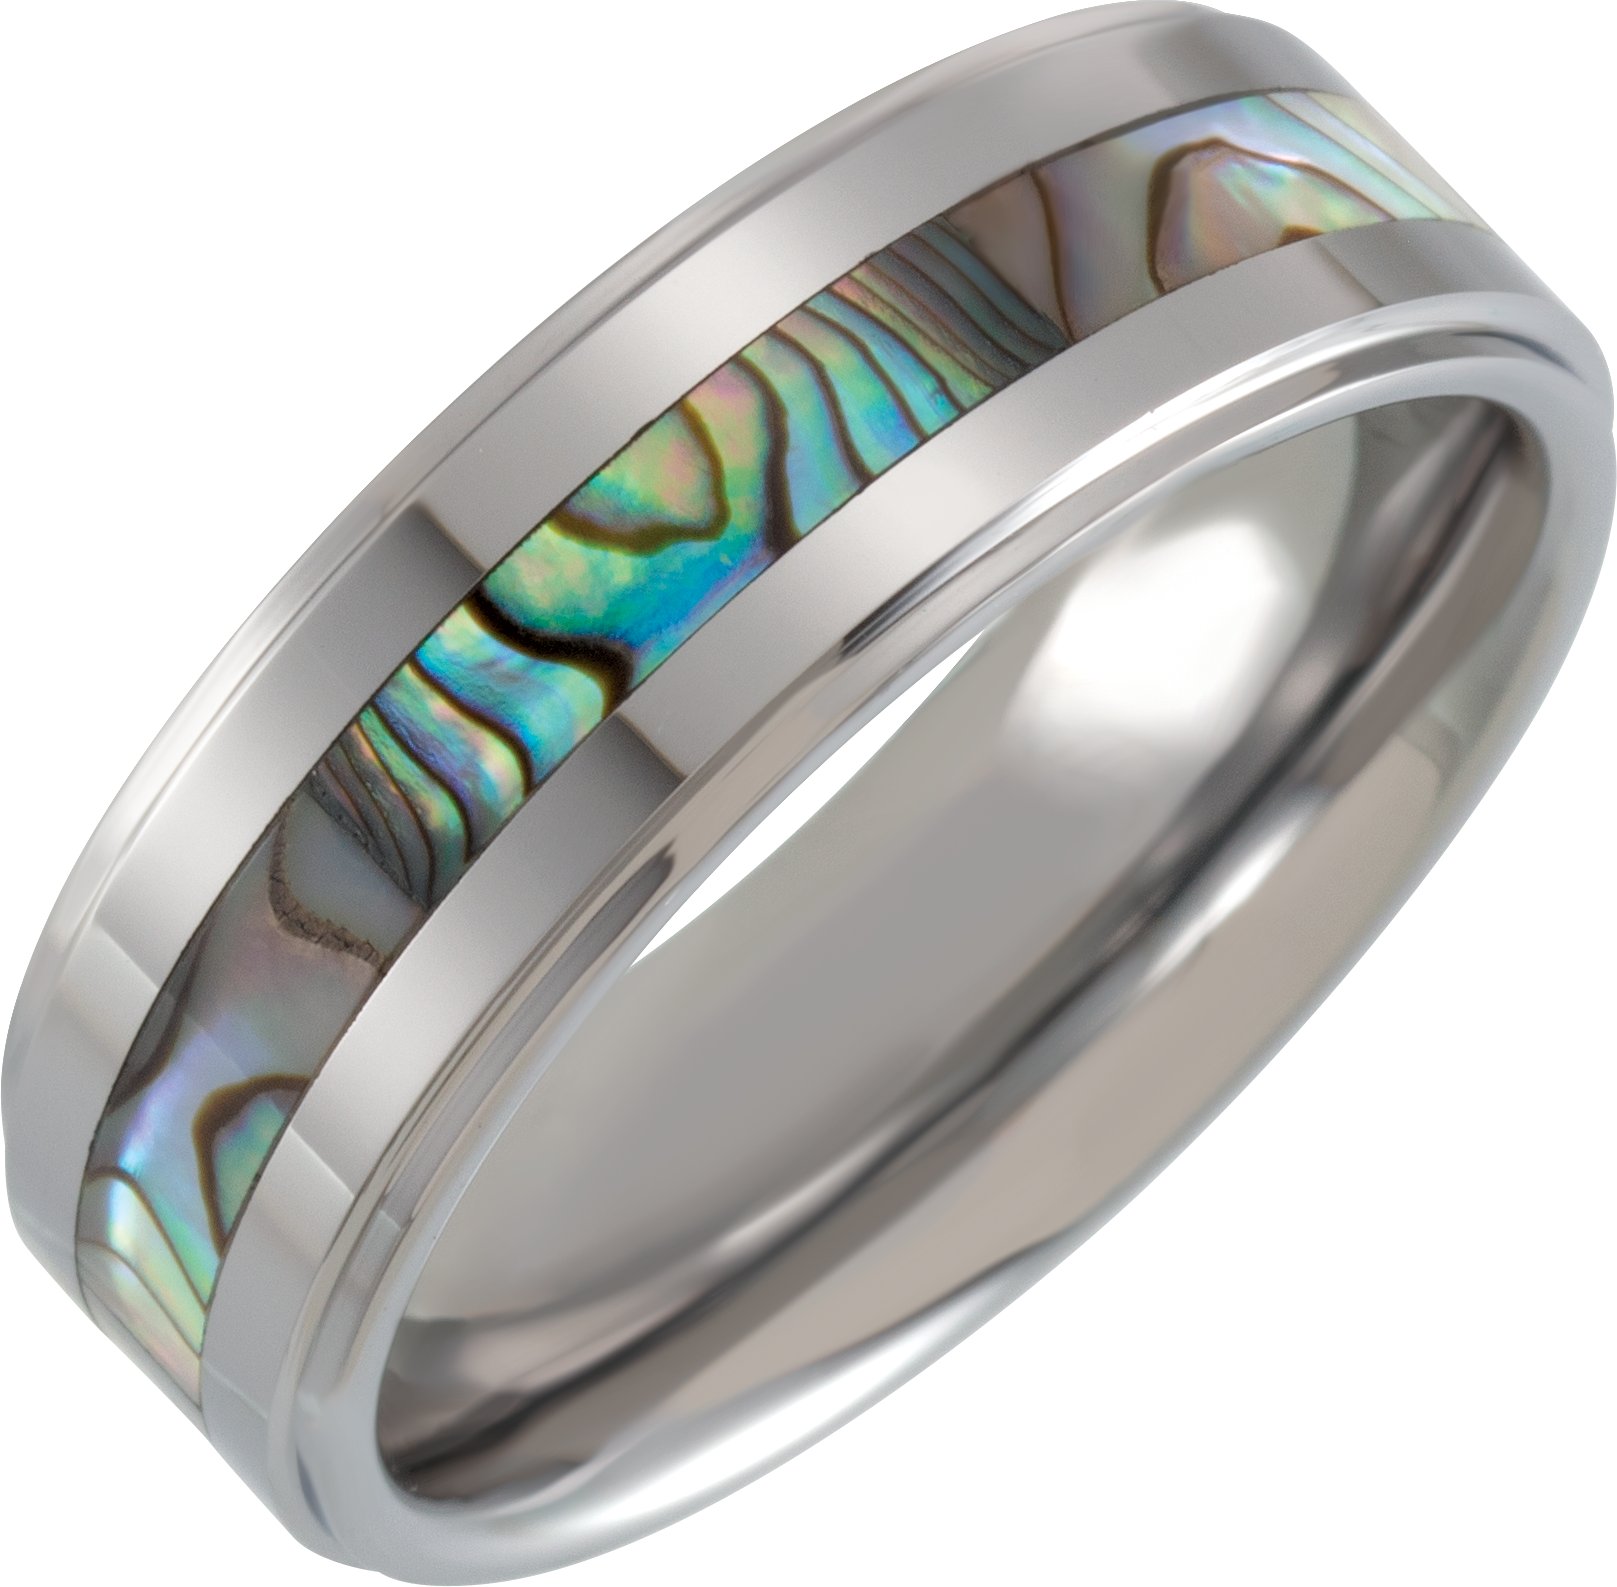 Tungsten 8 mm Flat Stepped Band with Mother of Pearl Inlay Size 11